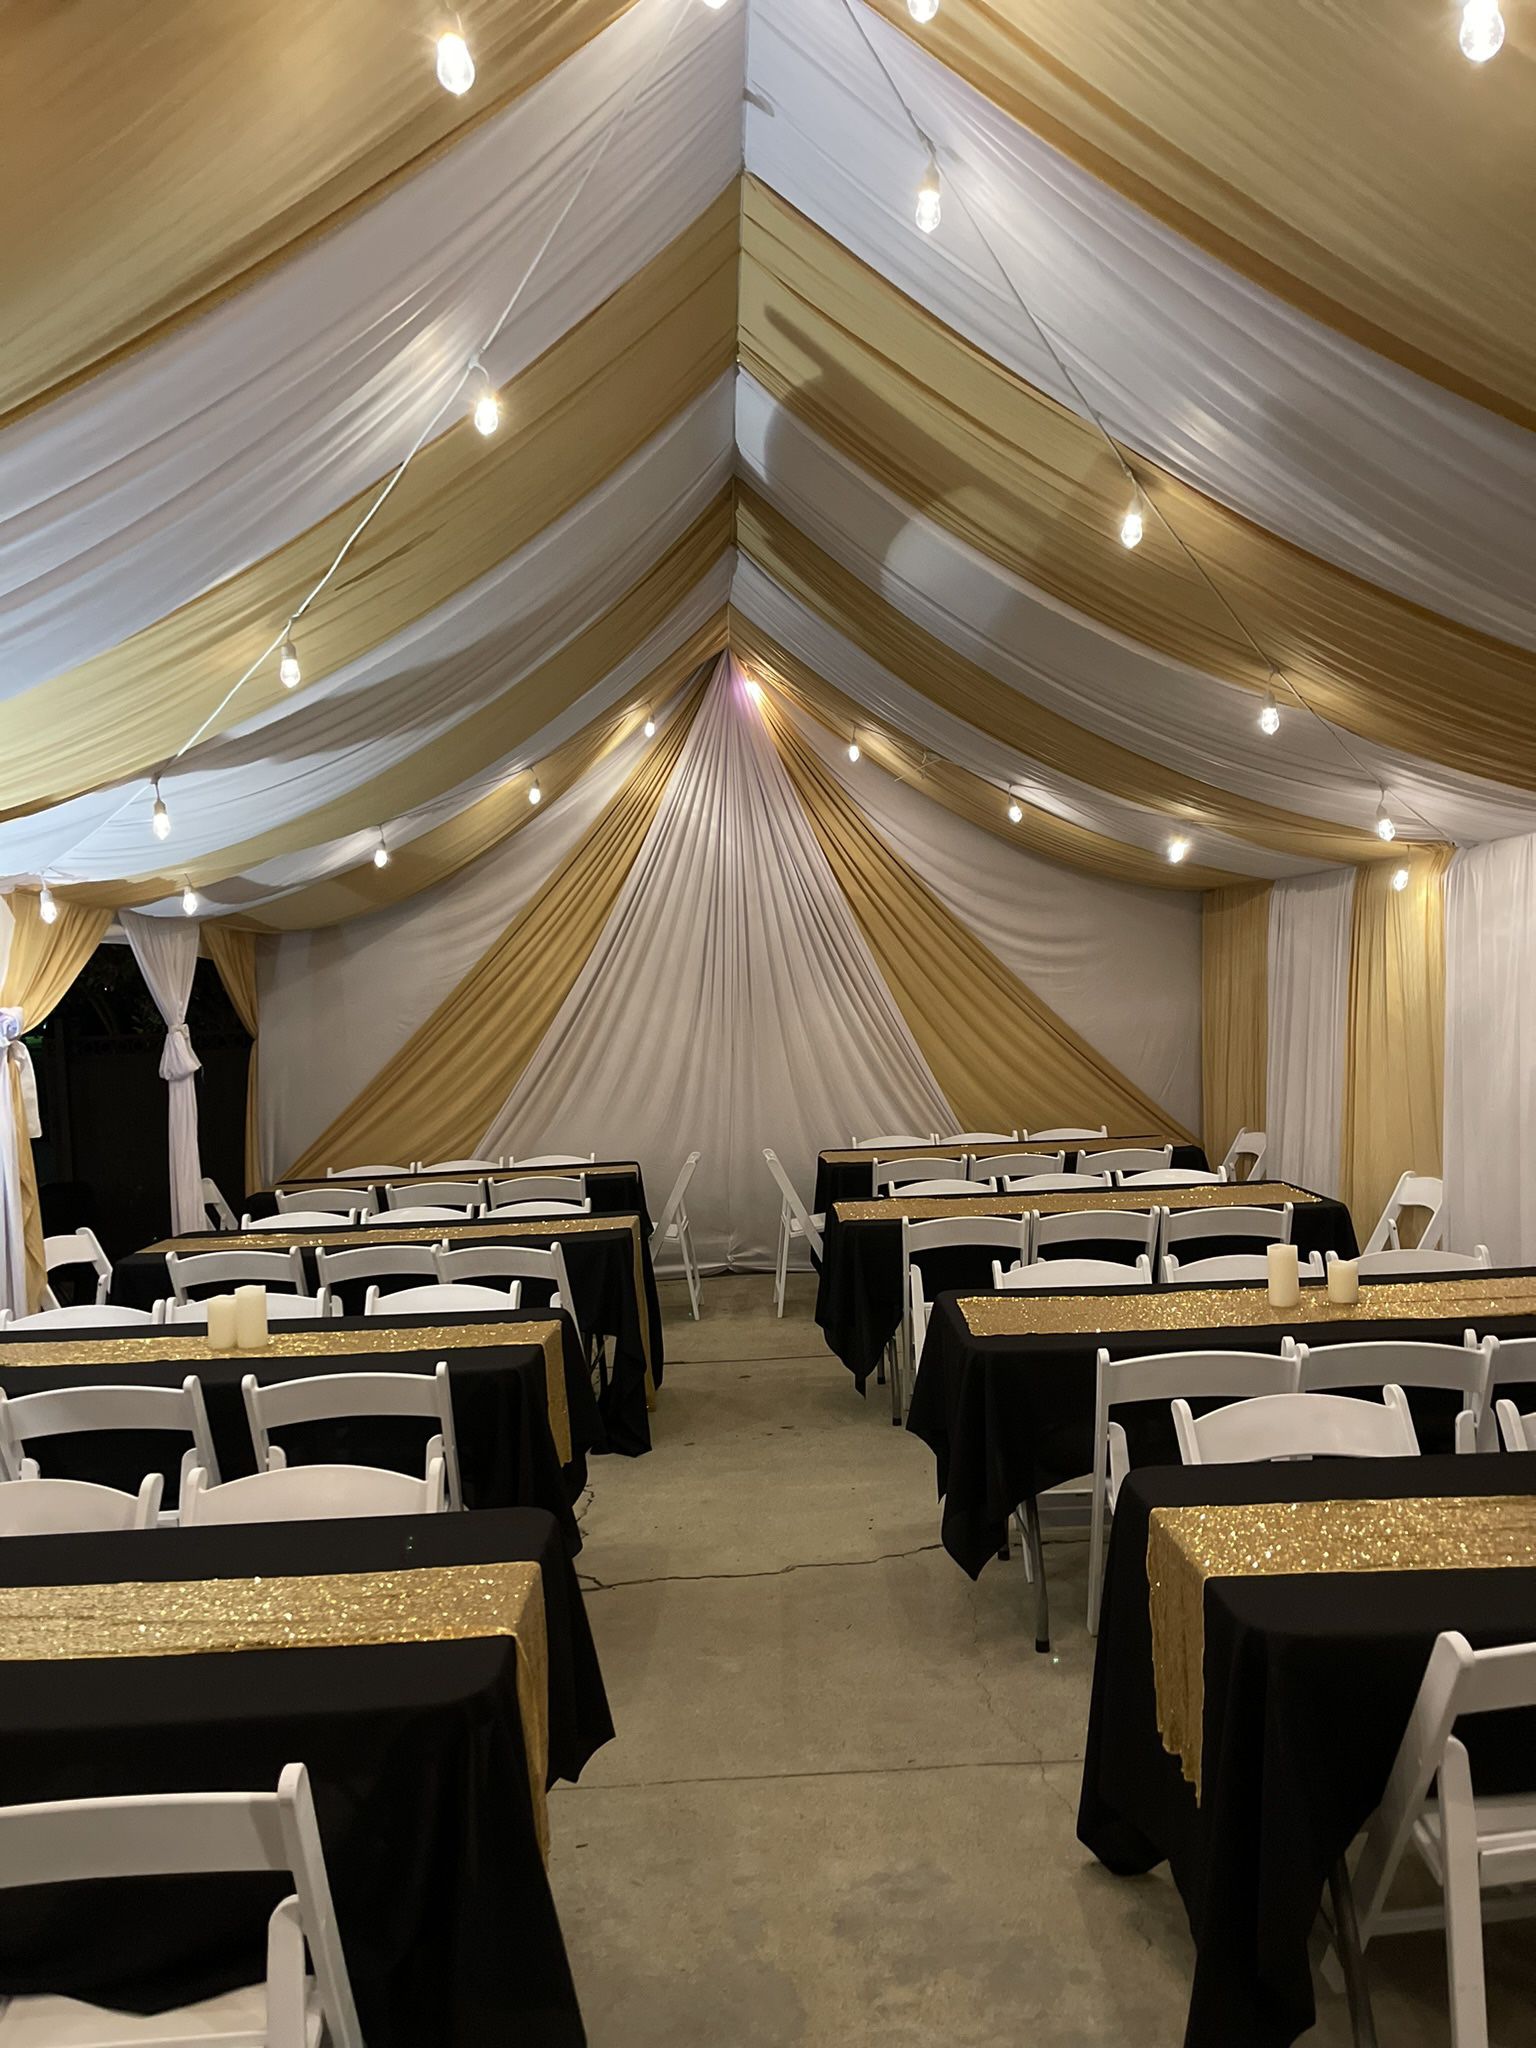 20x30 Tent & Drape With Chandeliers